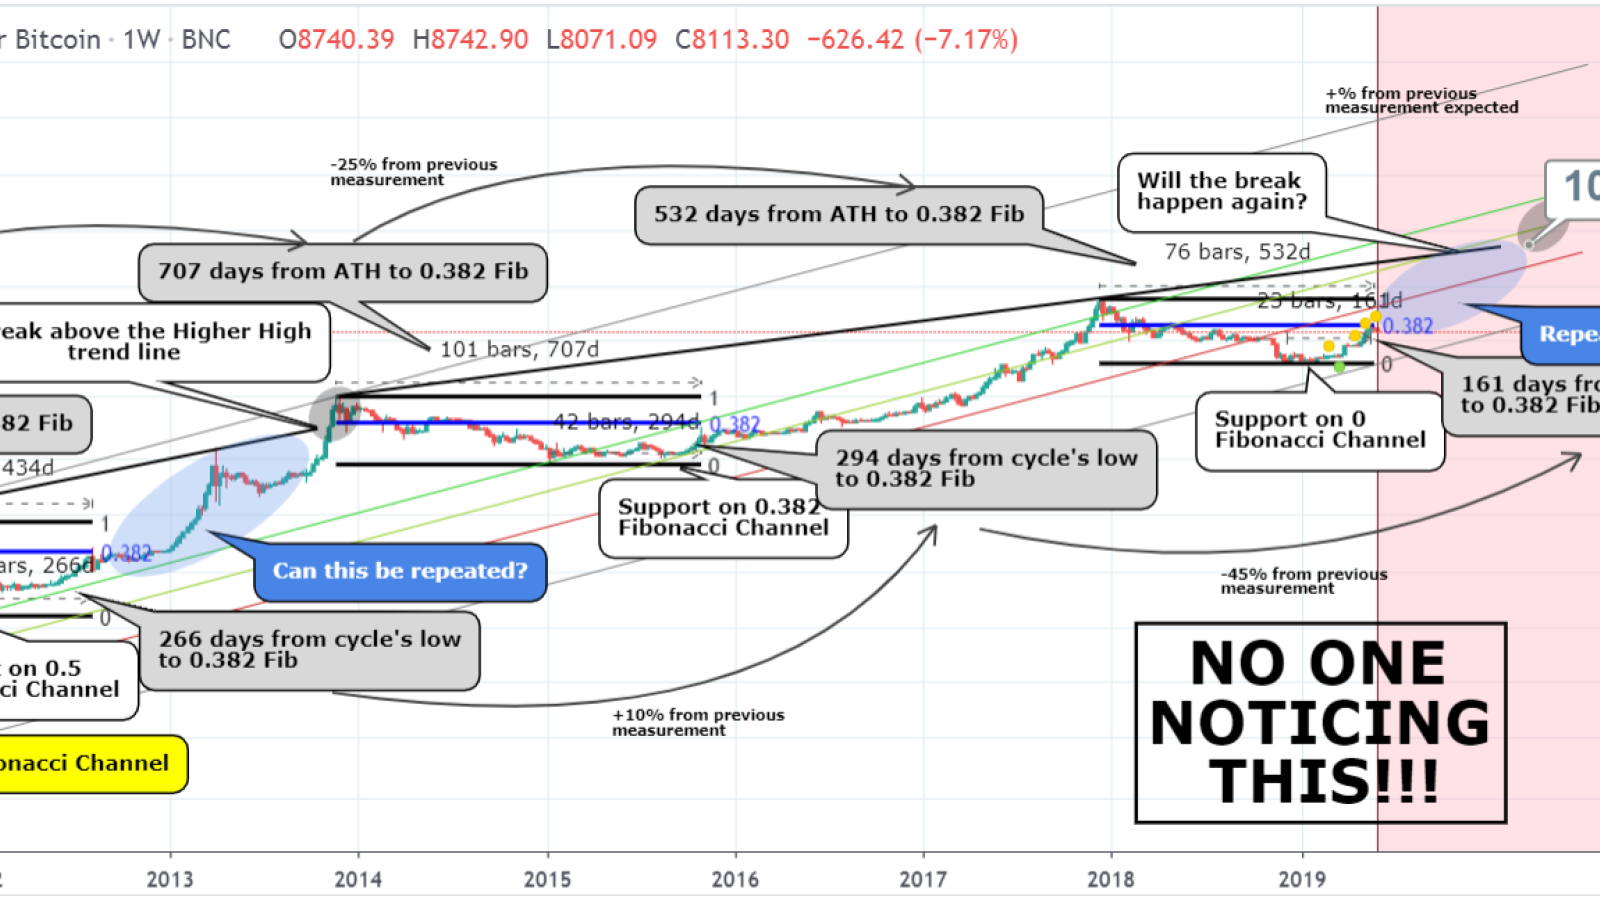 Will we see BTC reaching $100K by 2020?